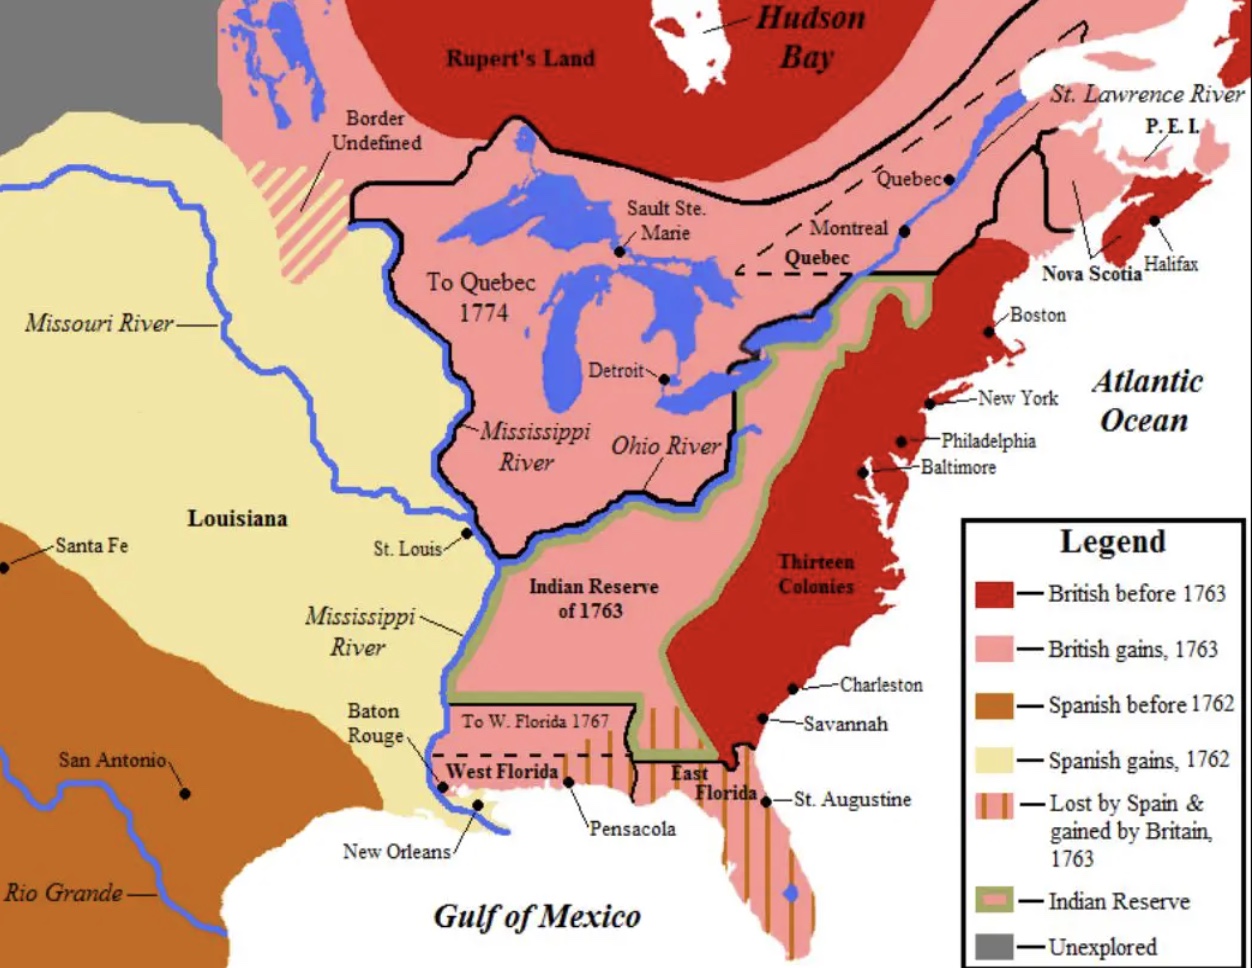 Map of North American After the French and Indian War (1763)